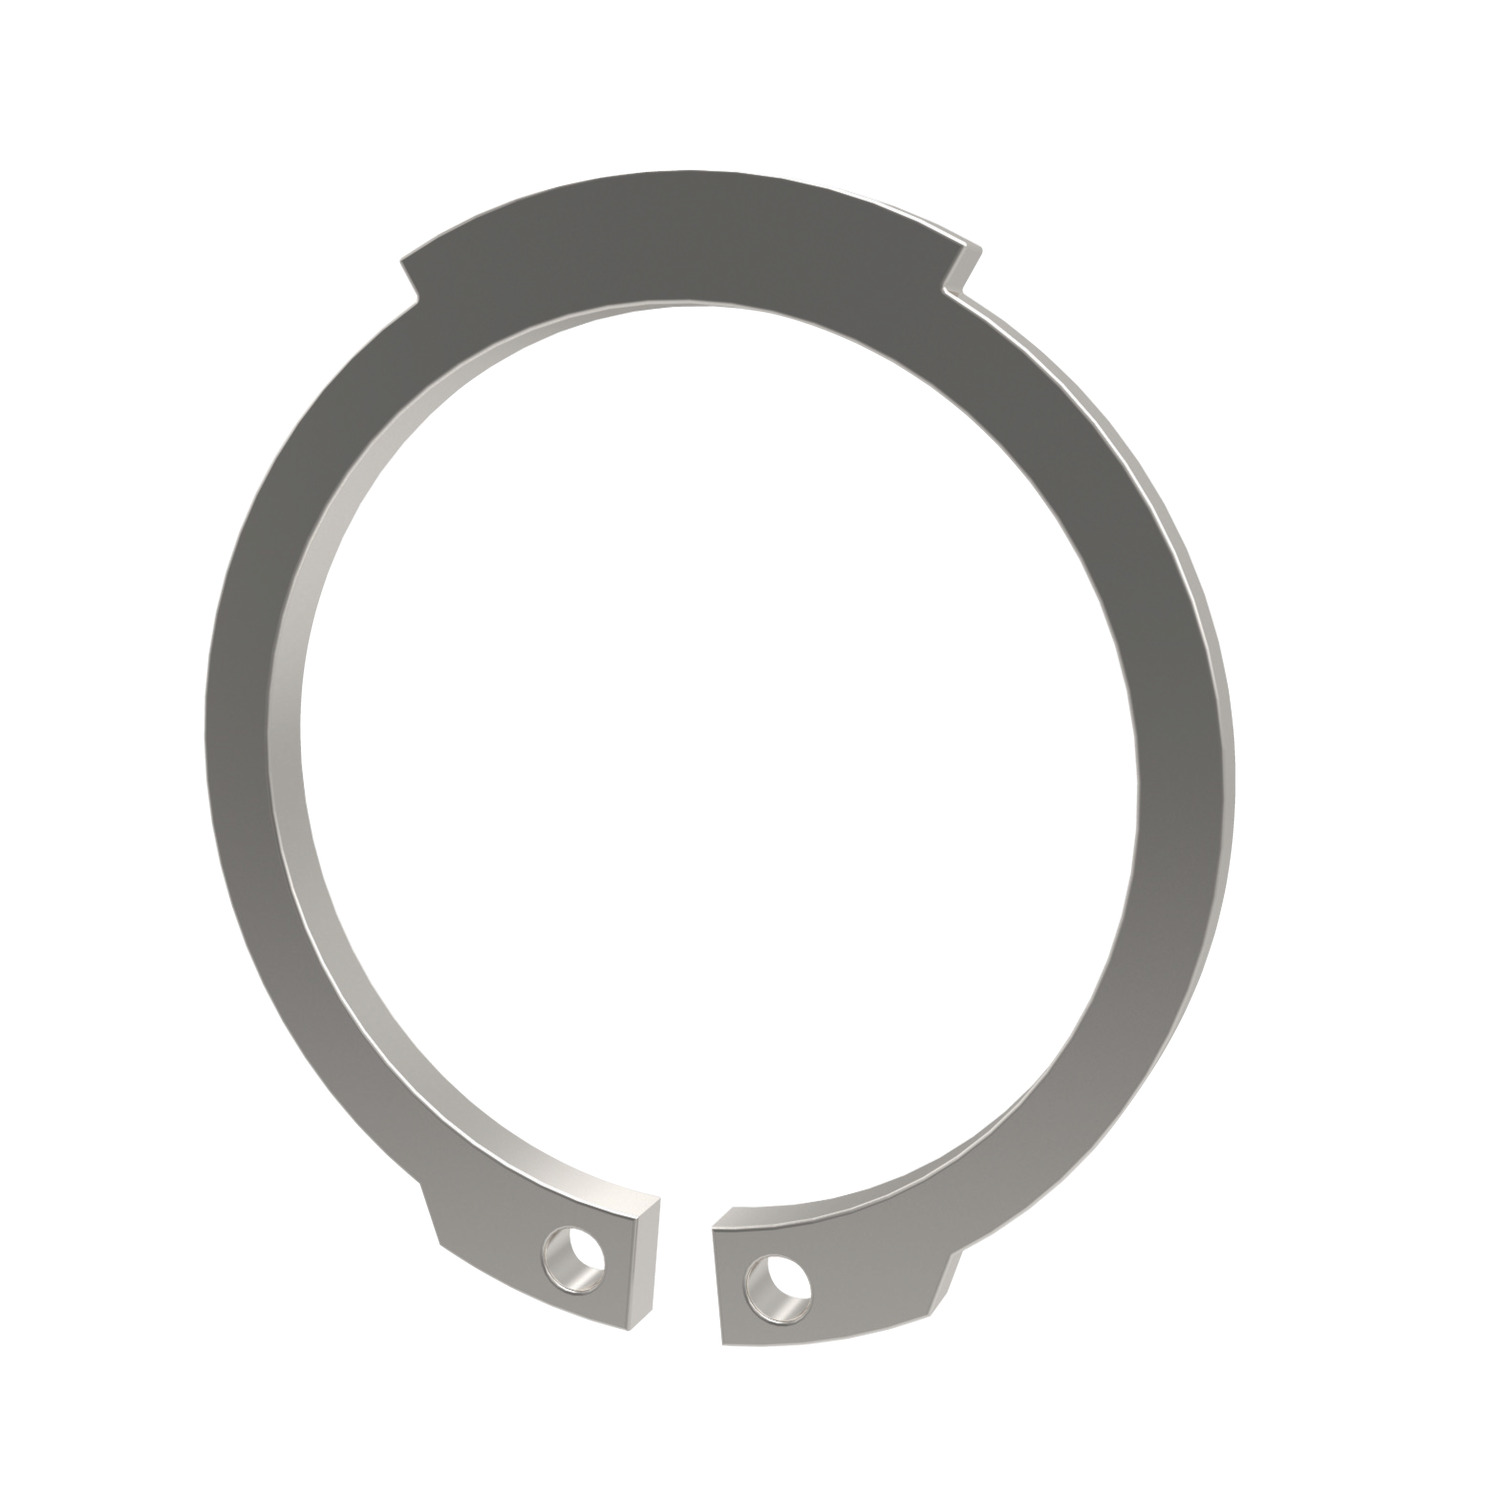 External A2 Circlips External circlips in A2 stainless steel. To DIN 471. Diameter 3 to 140mm. For shafts.